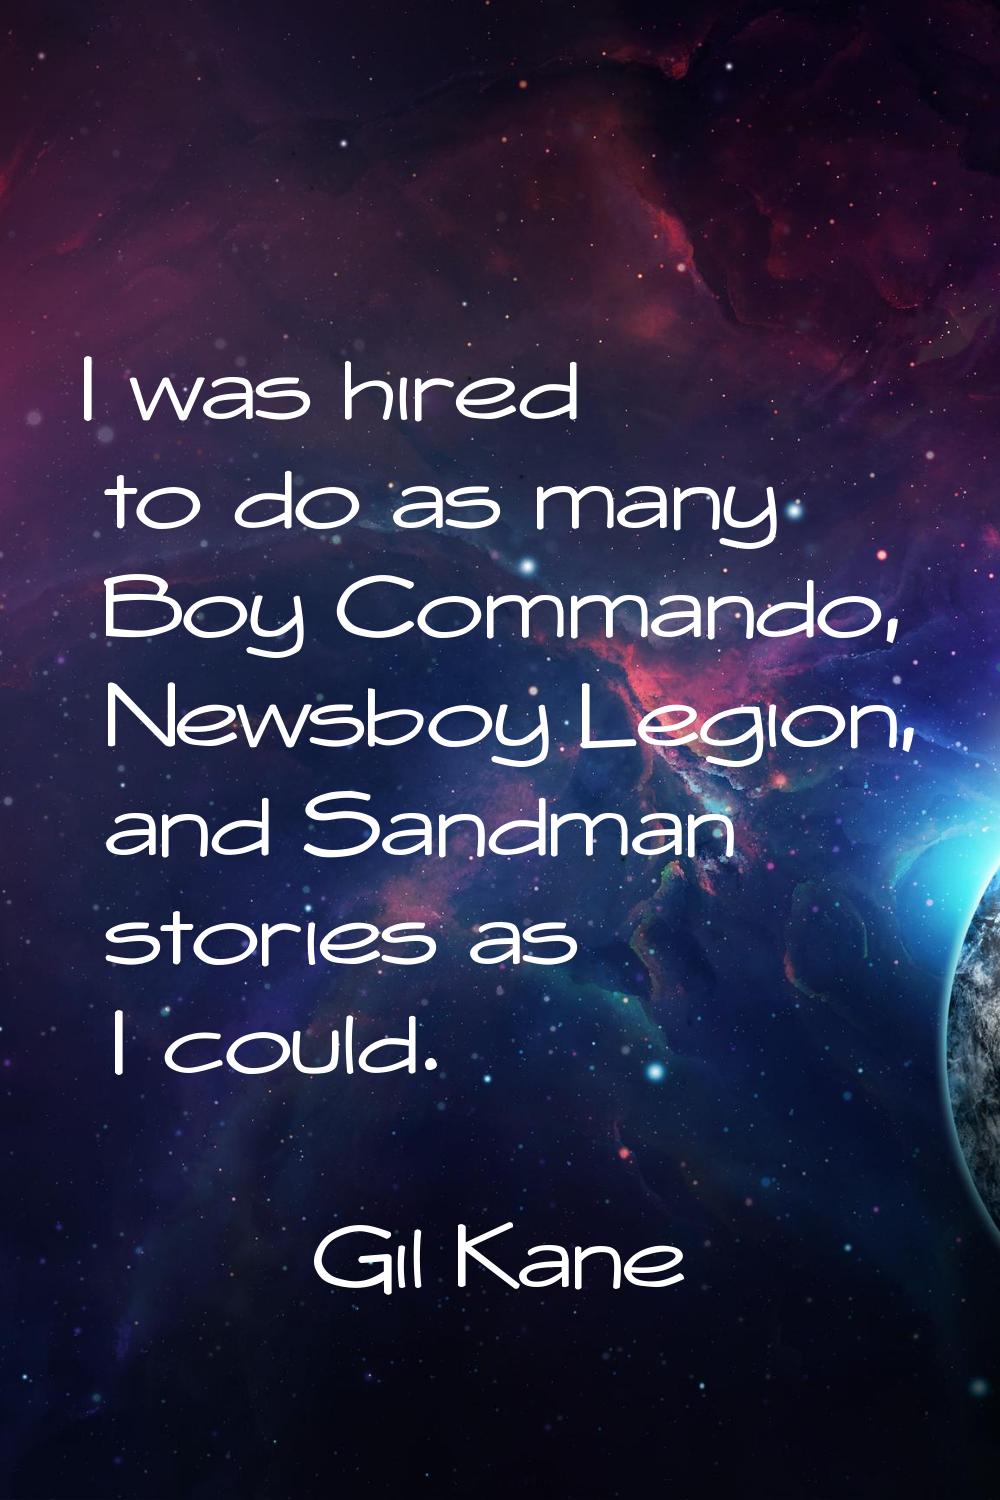 I was hired to do as many Boy Commando, Newsboy Legion, and Sandman stories as I could.